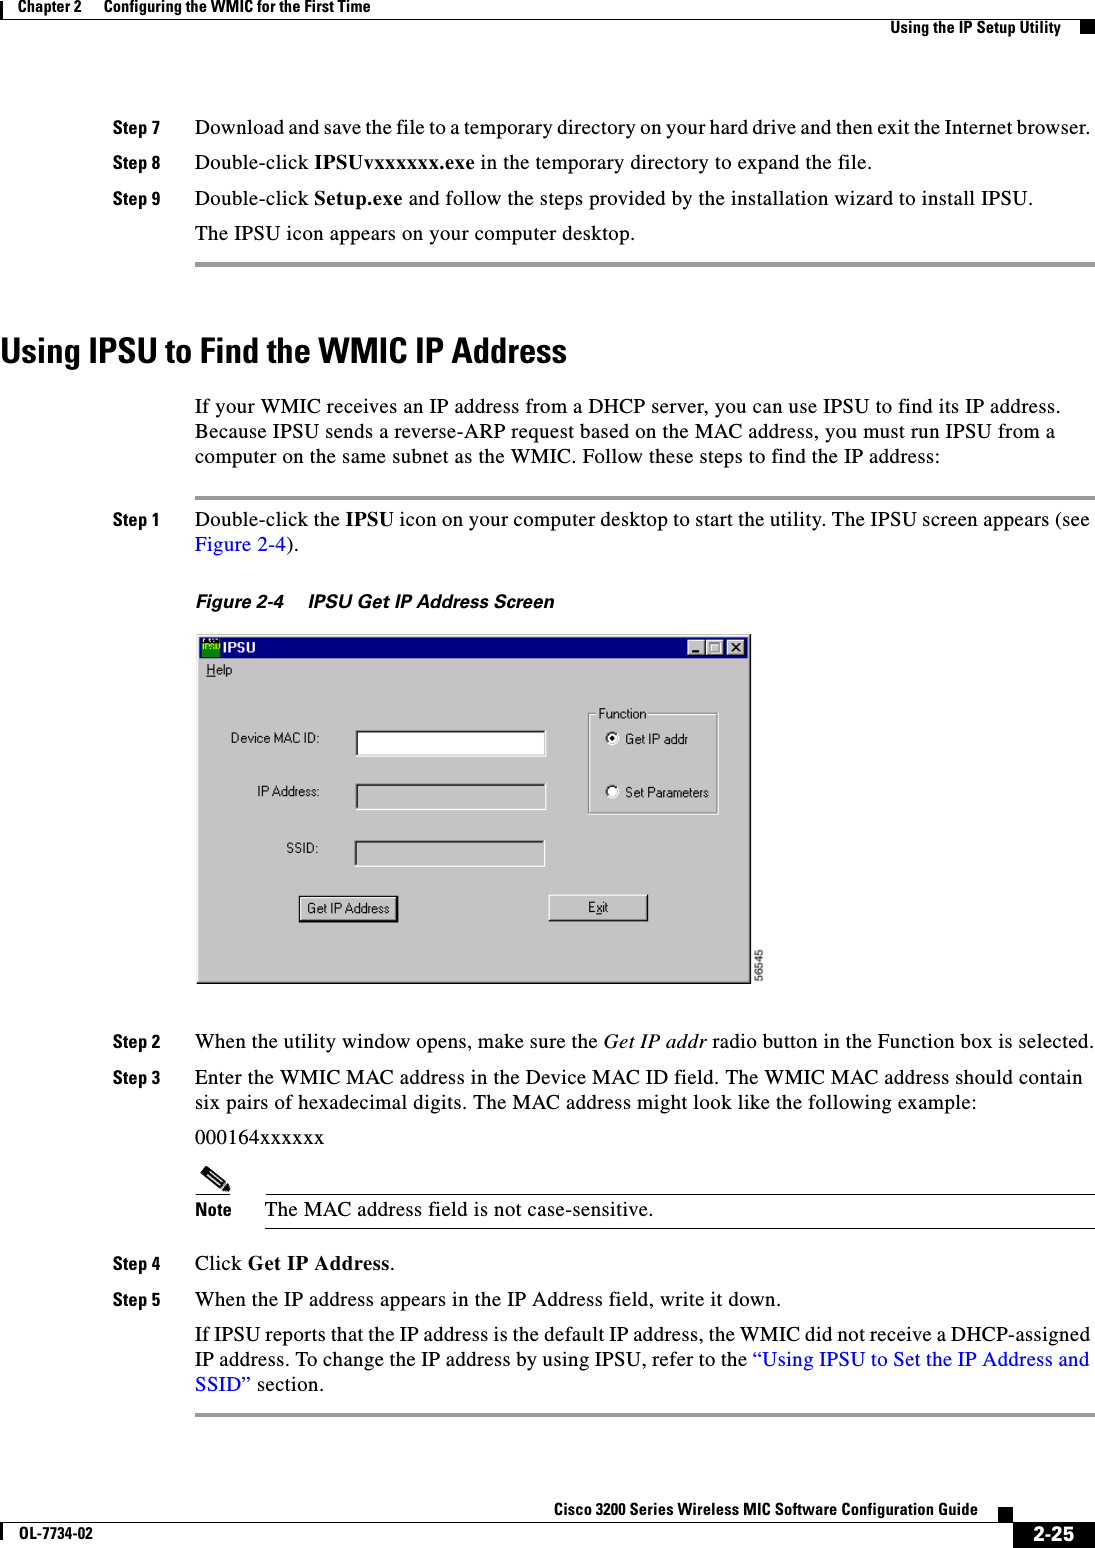 2-25Cisco 3200 Series Wireless MIC Software Configuration GuideOL-7734-02Chapter 2      Configuring the WMIC for the First TimeUsing the IP Setup UtilityStep 7 Download and save the file to a temporary directory on your hard drive and then exit the Internet browser. Step 8 Double-click IPSUvxxxxxx.exe in the temporary directory to expand the file.Step 9 Double-click Setup.exe and follow the steps provided by the installation wizard to install IPSU.The IPSU icon appears on your computer desktop.Using IPSU to Find the WMIC IP AddressIf your WMIC receives an IP address from a DHCP server, you can use IPSU to find its IP address. Because IPSU sends a reverse-ARP request based on the MAC address, you must run IPSU from a computer on the same subnet as the WMIC. Follow these steps to find the IP address:Step 1 Double-click the IPSU icon on your computer desktop to start the utility. The IPSU screen appears (see Figure 2-4).Figure 2-4 IPSU Get IP Address ScreenStep 2 When the utility window opens, make sure the Get IP addr radio button in the Function box is selected.Step 3 Enter the WMIC MAC address in the Device MAC ID field. The WMIC MAC address should contain six pairs of hexadecimal digits. The MAC address might look like the following example:000164xxxxxxNote The MAC address field is not case-sensitive.Step 4 Click Get IP Address.Step 5 When the IP address appears in the IP Address field, write it down. If IPSU reports that the IP address is the default IP address, the WMIC did not receive a DHCP-assigned IP address. To change the IP address by using IPSU, refer to the “Using IPSU to Set the IP Address and SSID” section. 